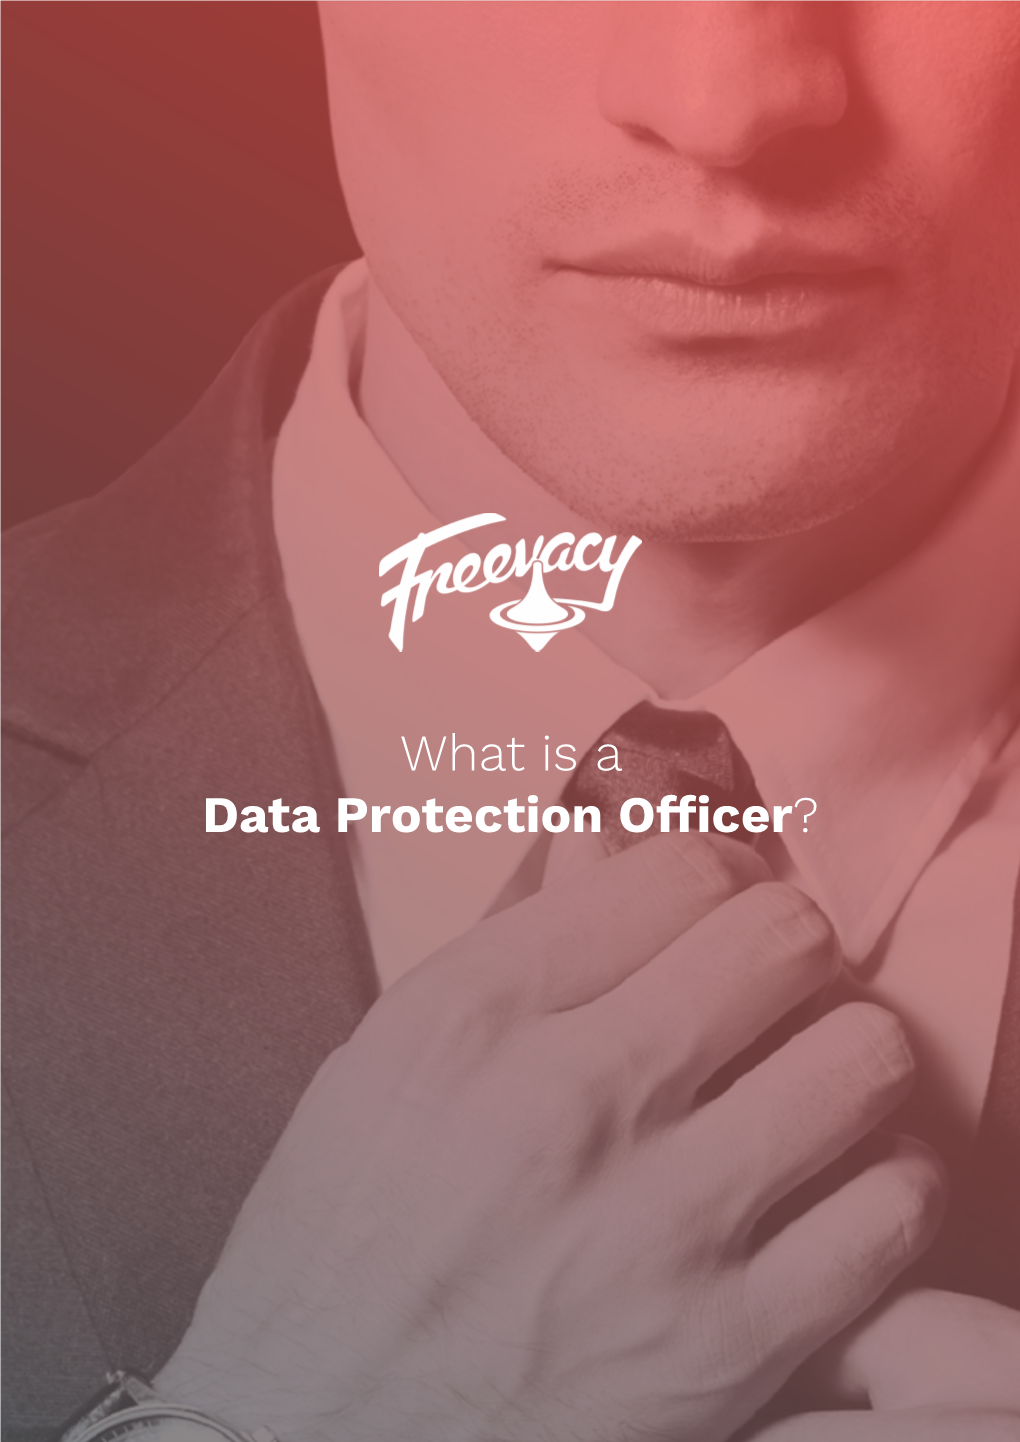 What Is a Data Protection Officer? INTRODUCTION